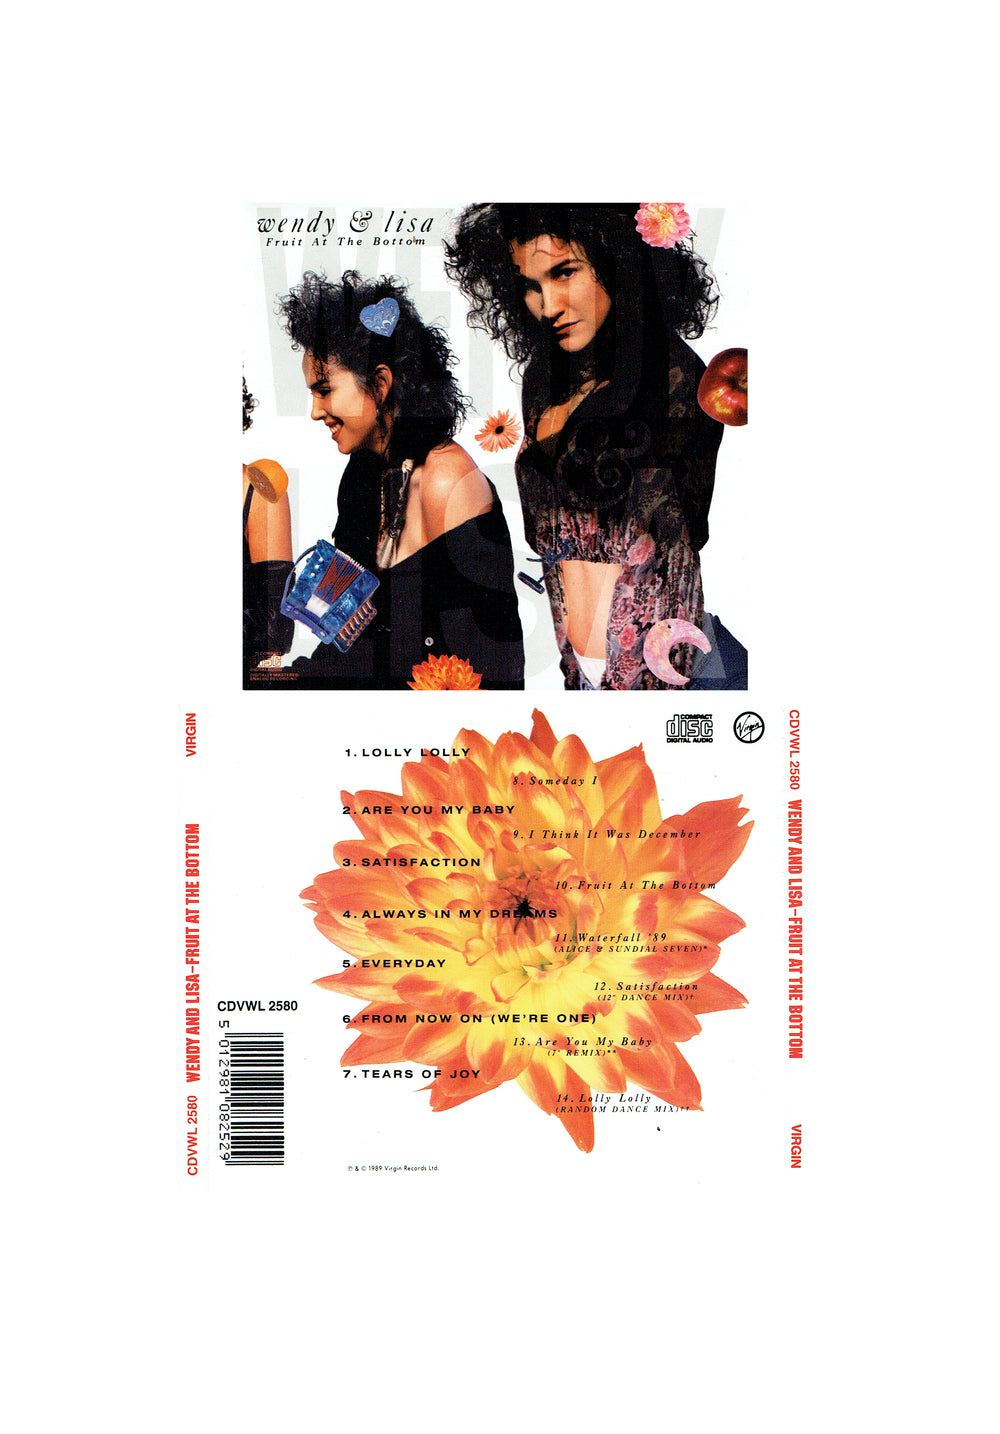 Wendy & Lisa Fruit At The Bottom Extended Play CD Album 1989 14 Track Prince